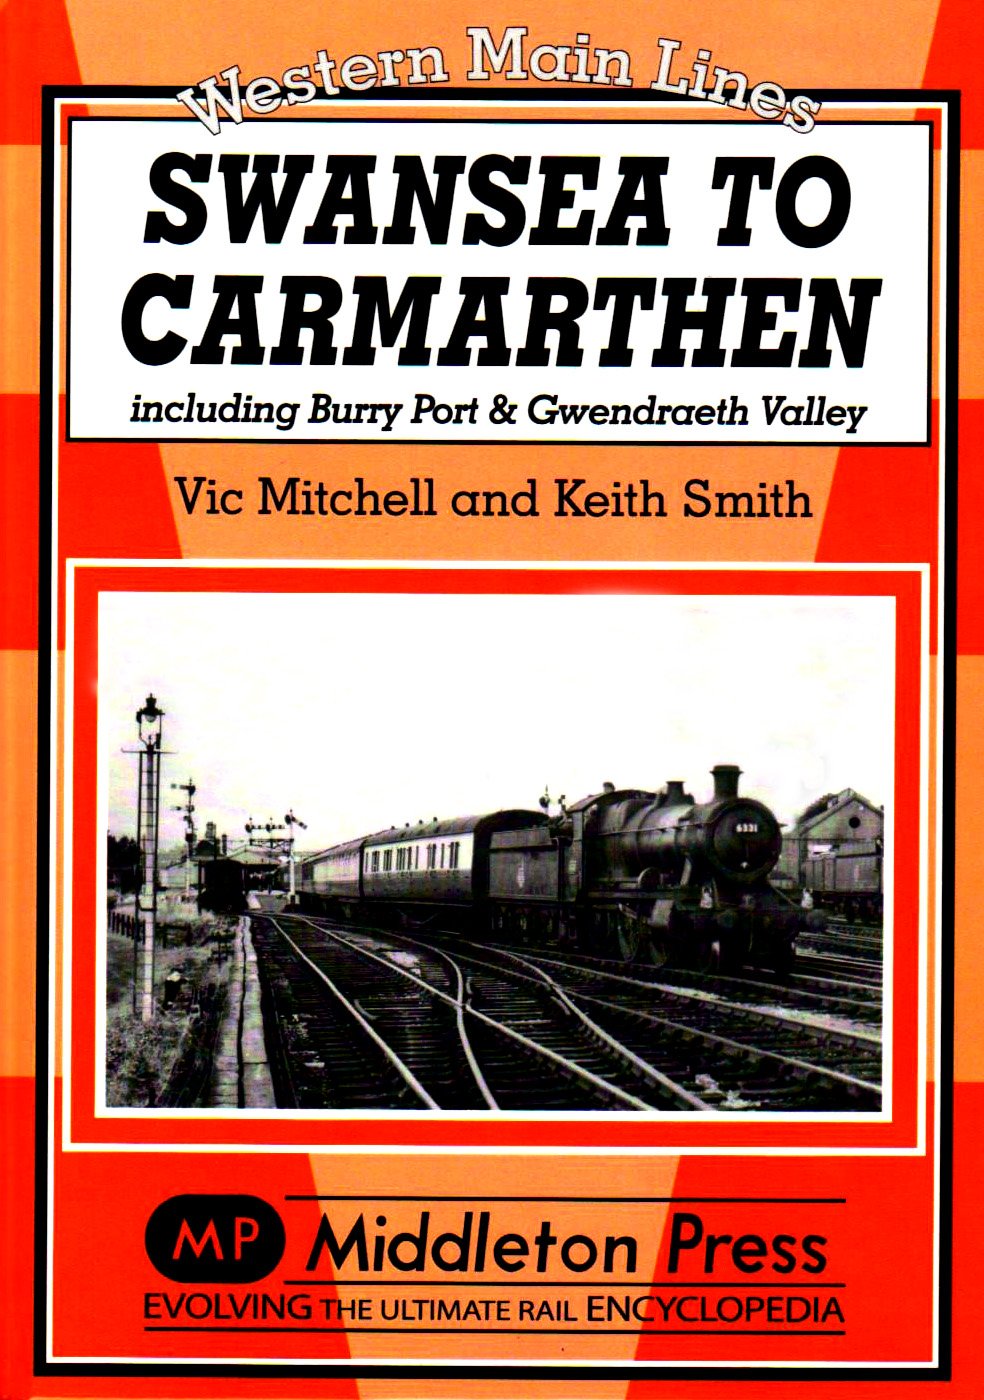 Western Main Lines Swansea to Carmarthen including Burry Port & Gwendreath Valley